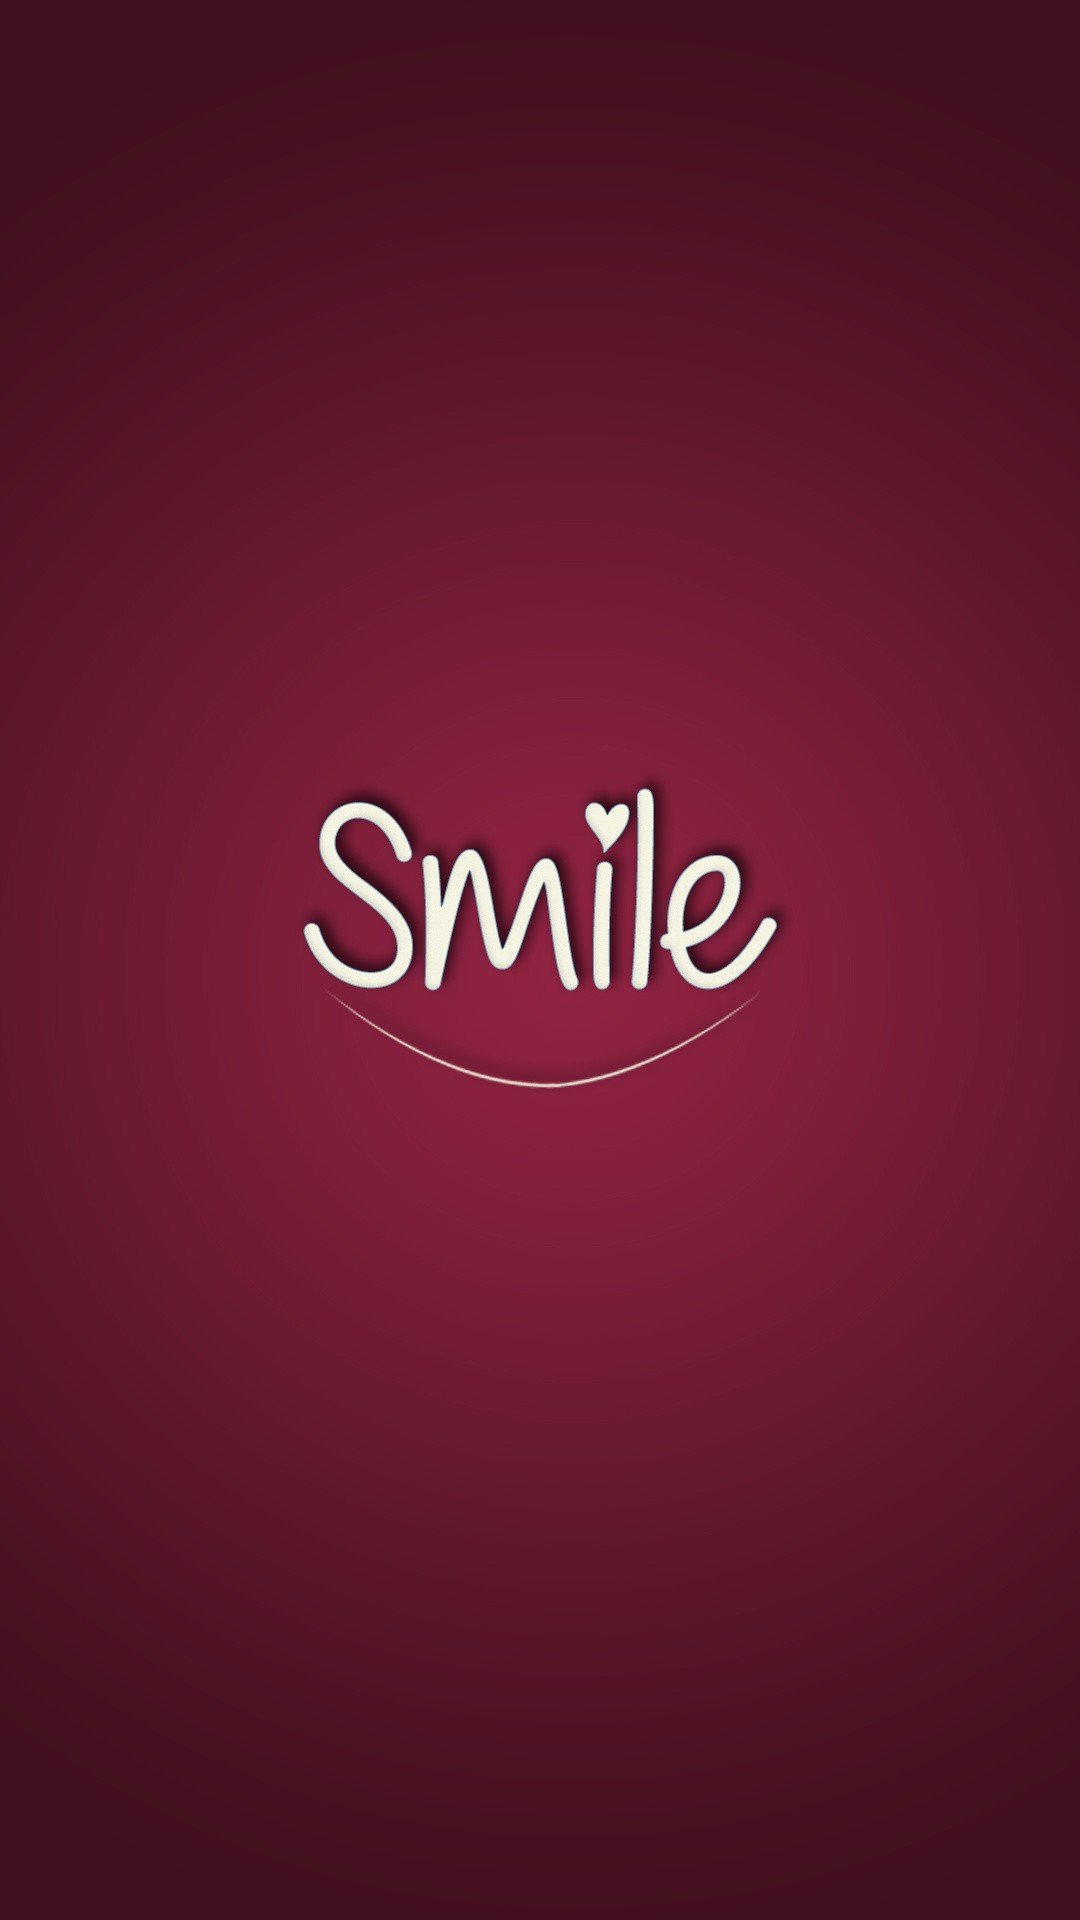 Keep Smiling Quotes Wallpaper QuotesGram